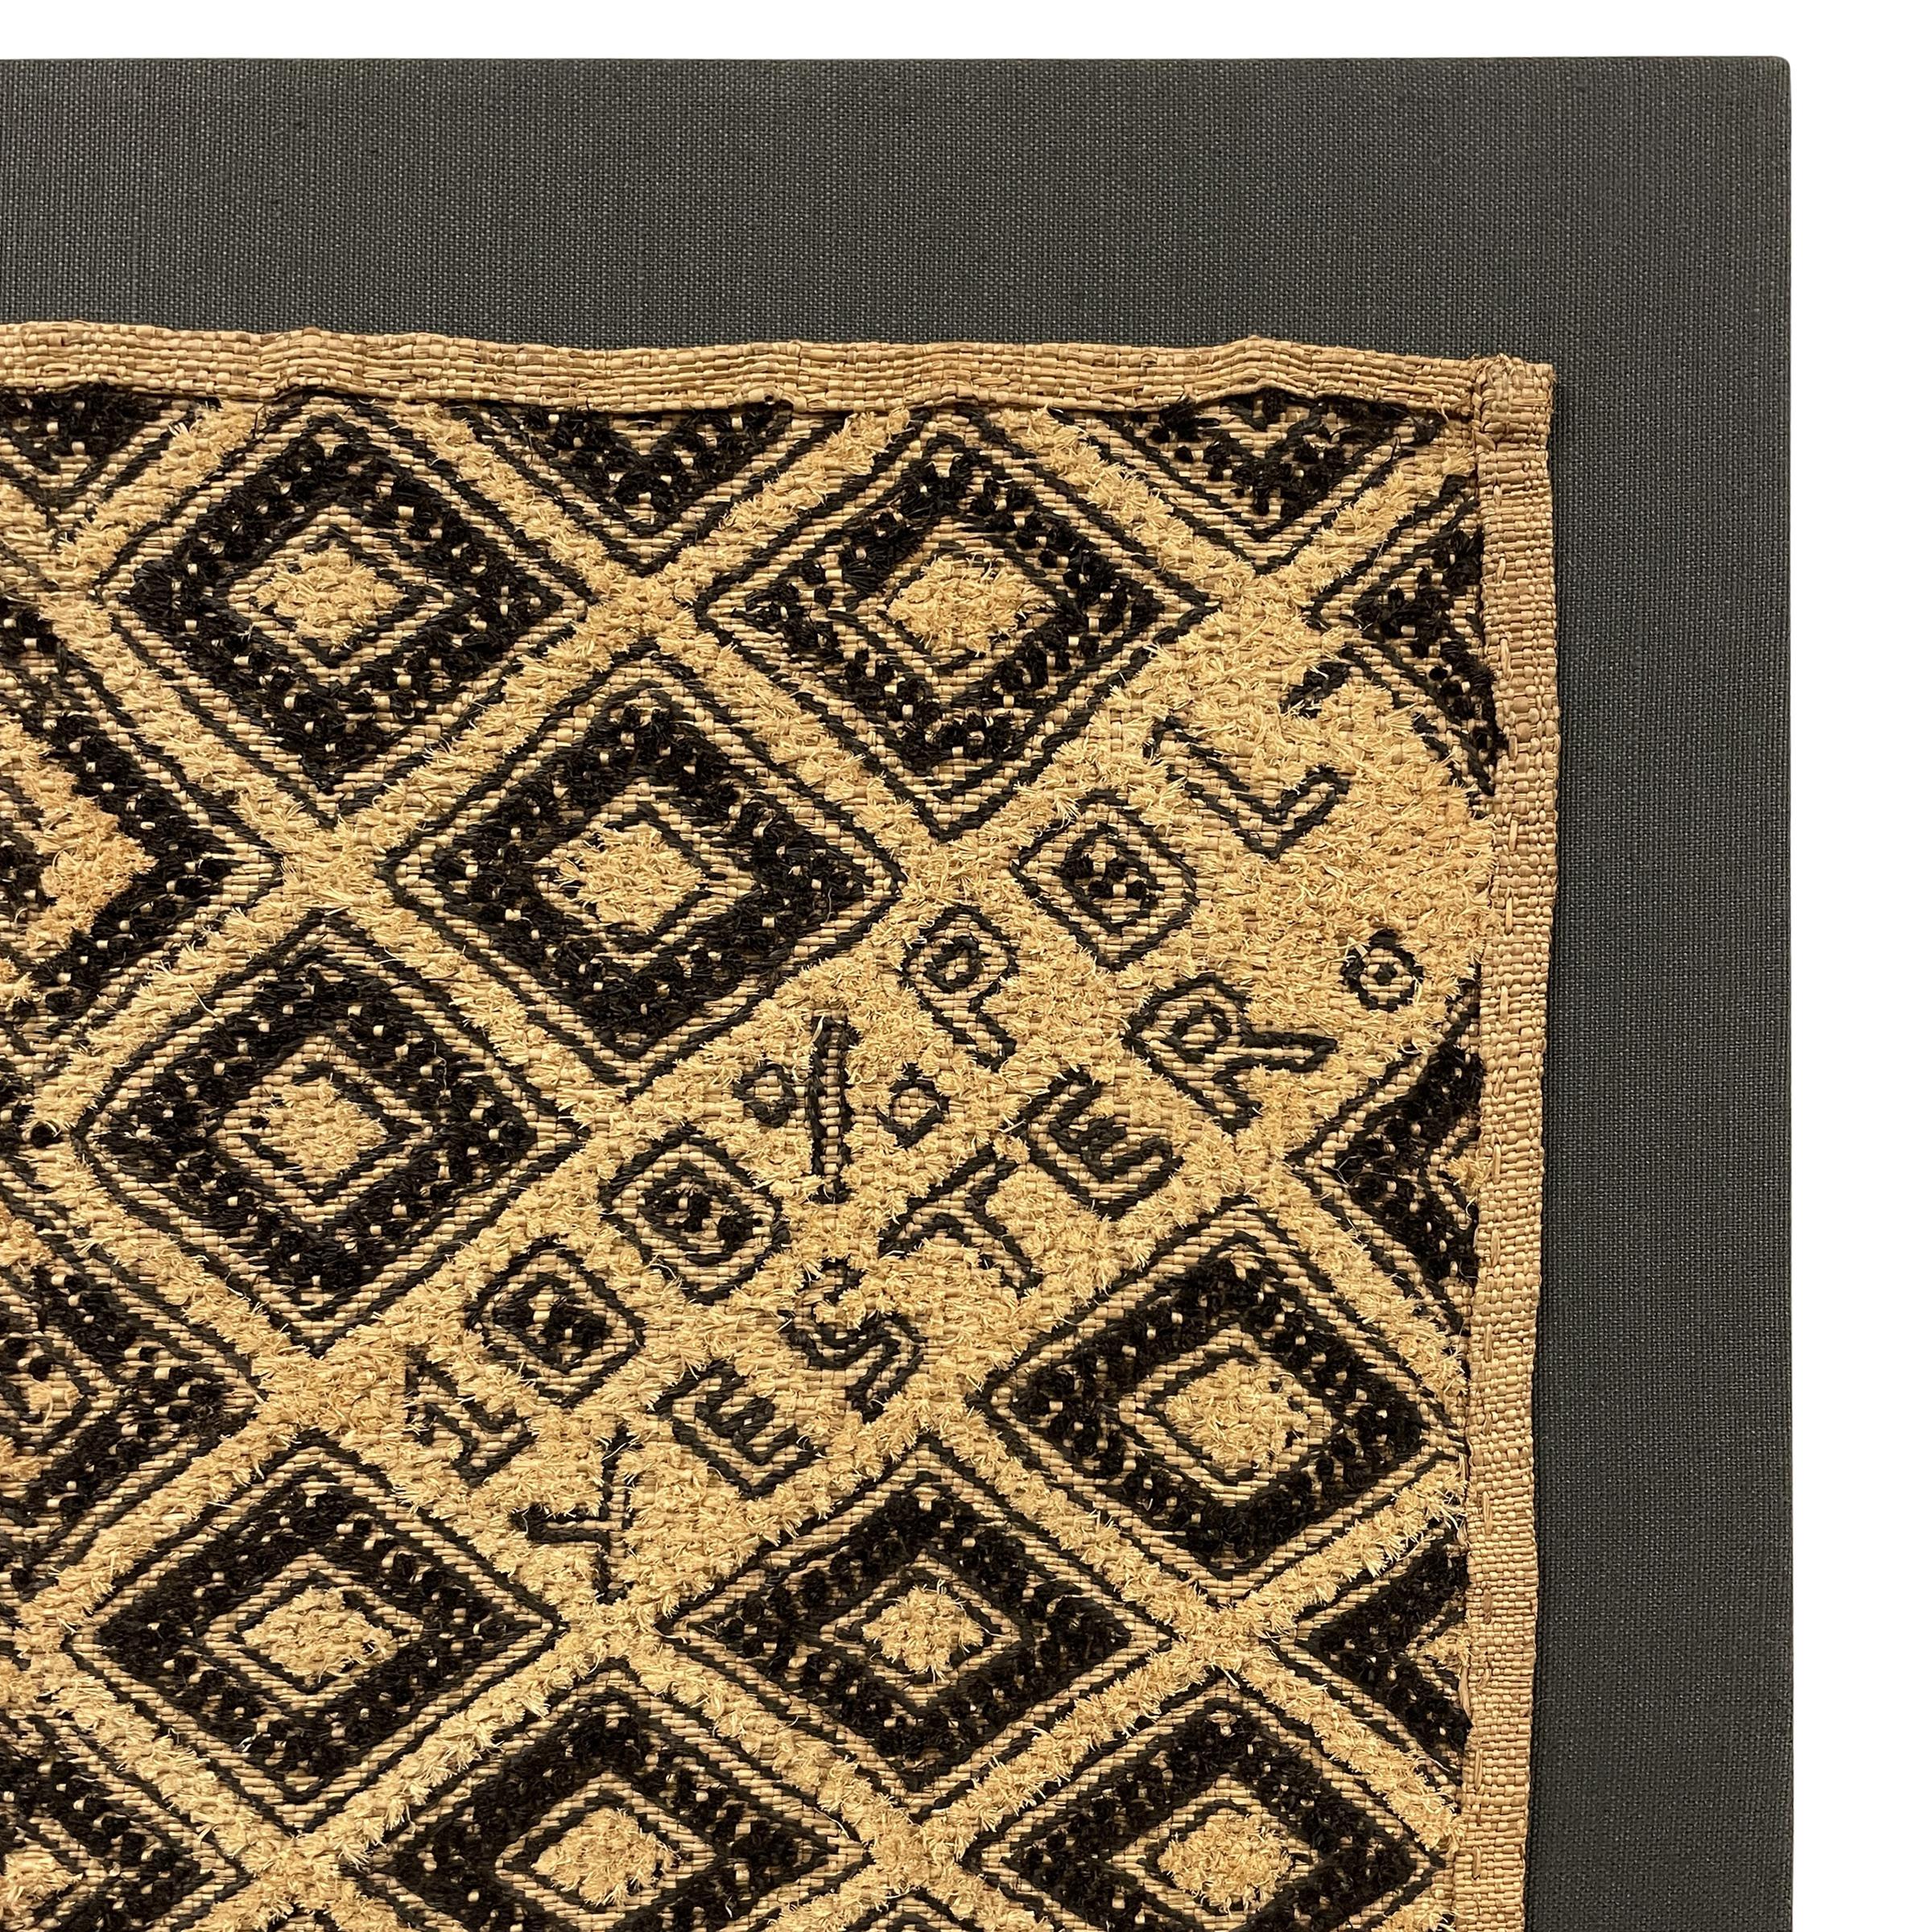 A provocative late 20th century Kuba cloth panel with a bold zigzag and diamond pattern woven in black and natural cut pile raffia surrounding a tongue-in-cheek inscription reading, 